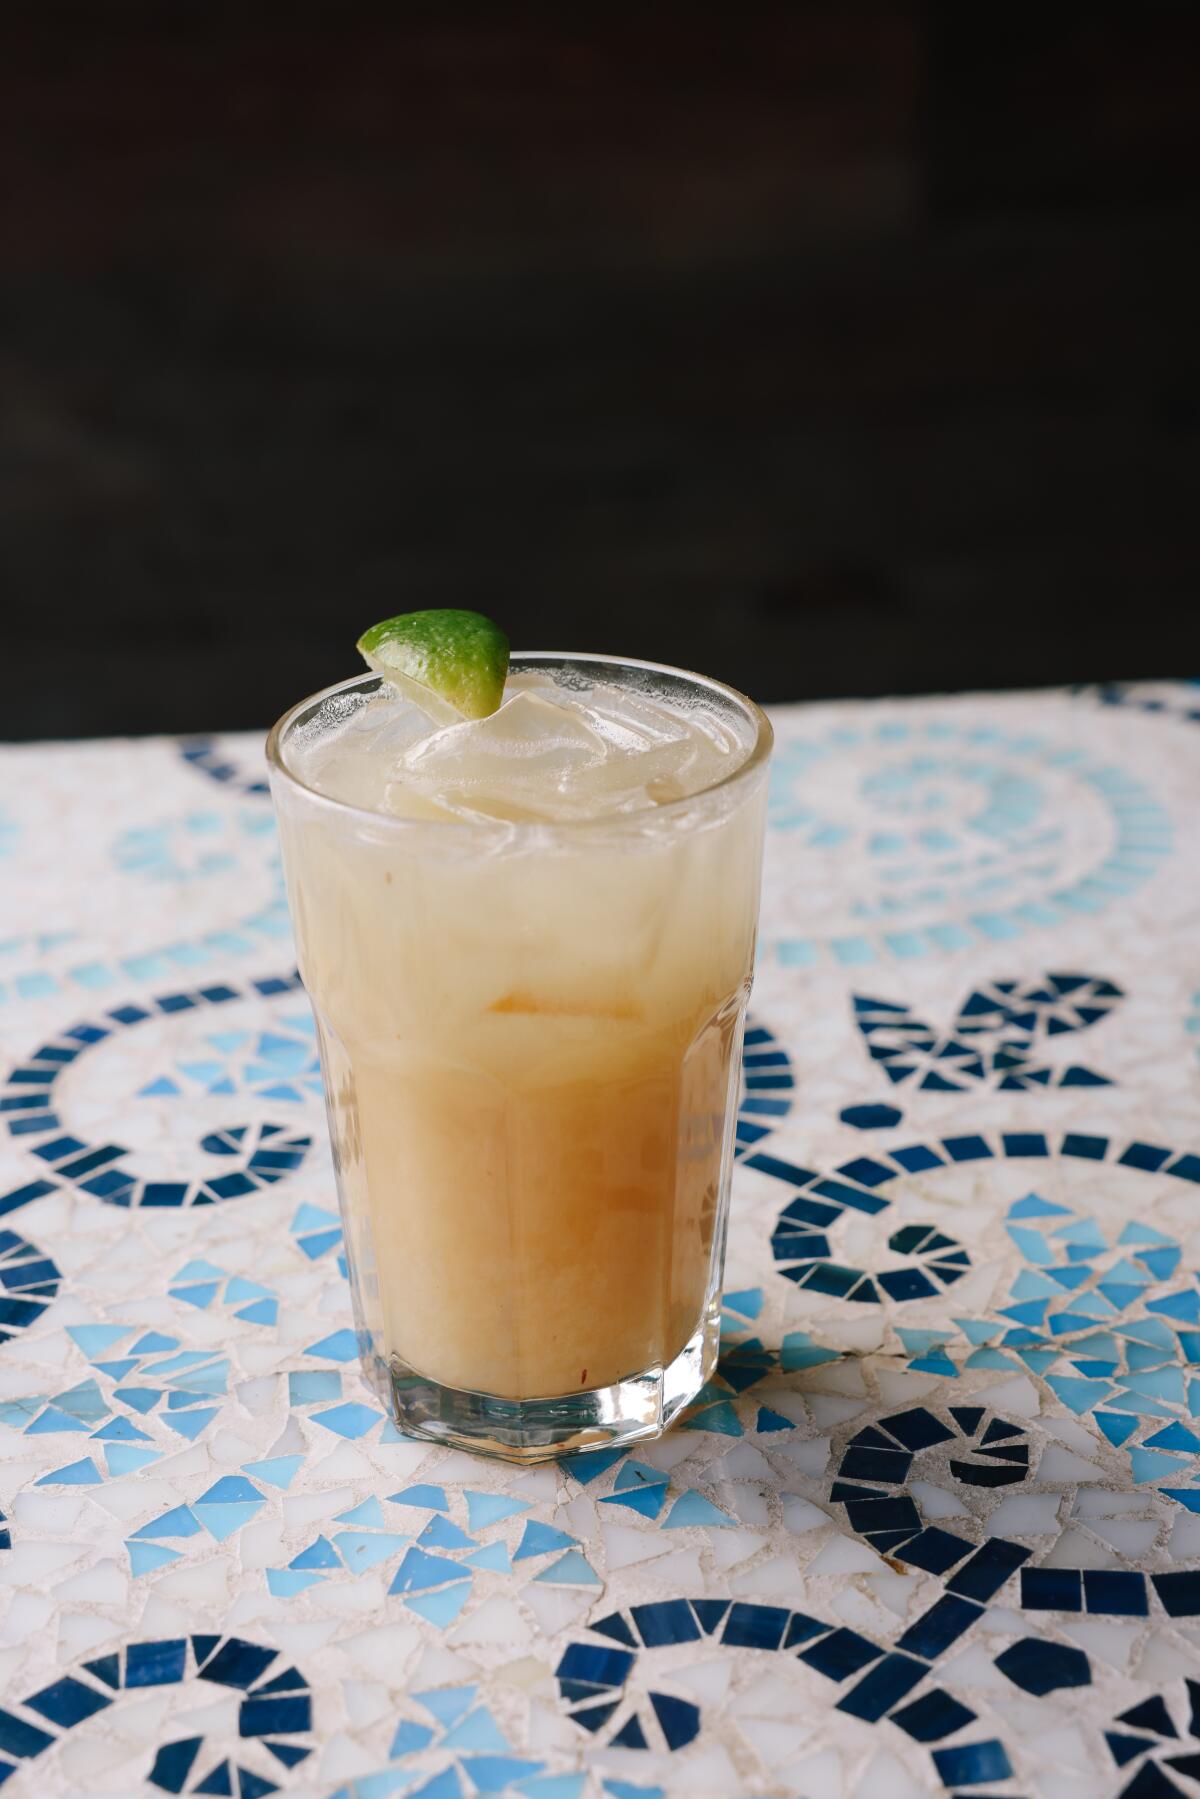 An iced coco-piña-guava fresca drink, garnished with a lime, on a mosaic-patterned surface